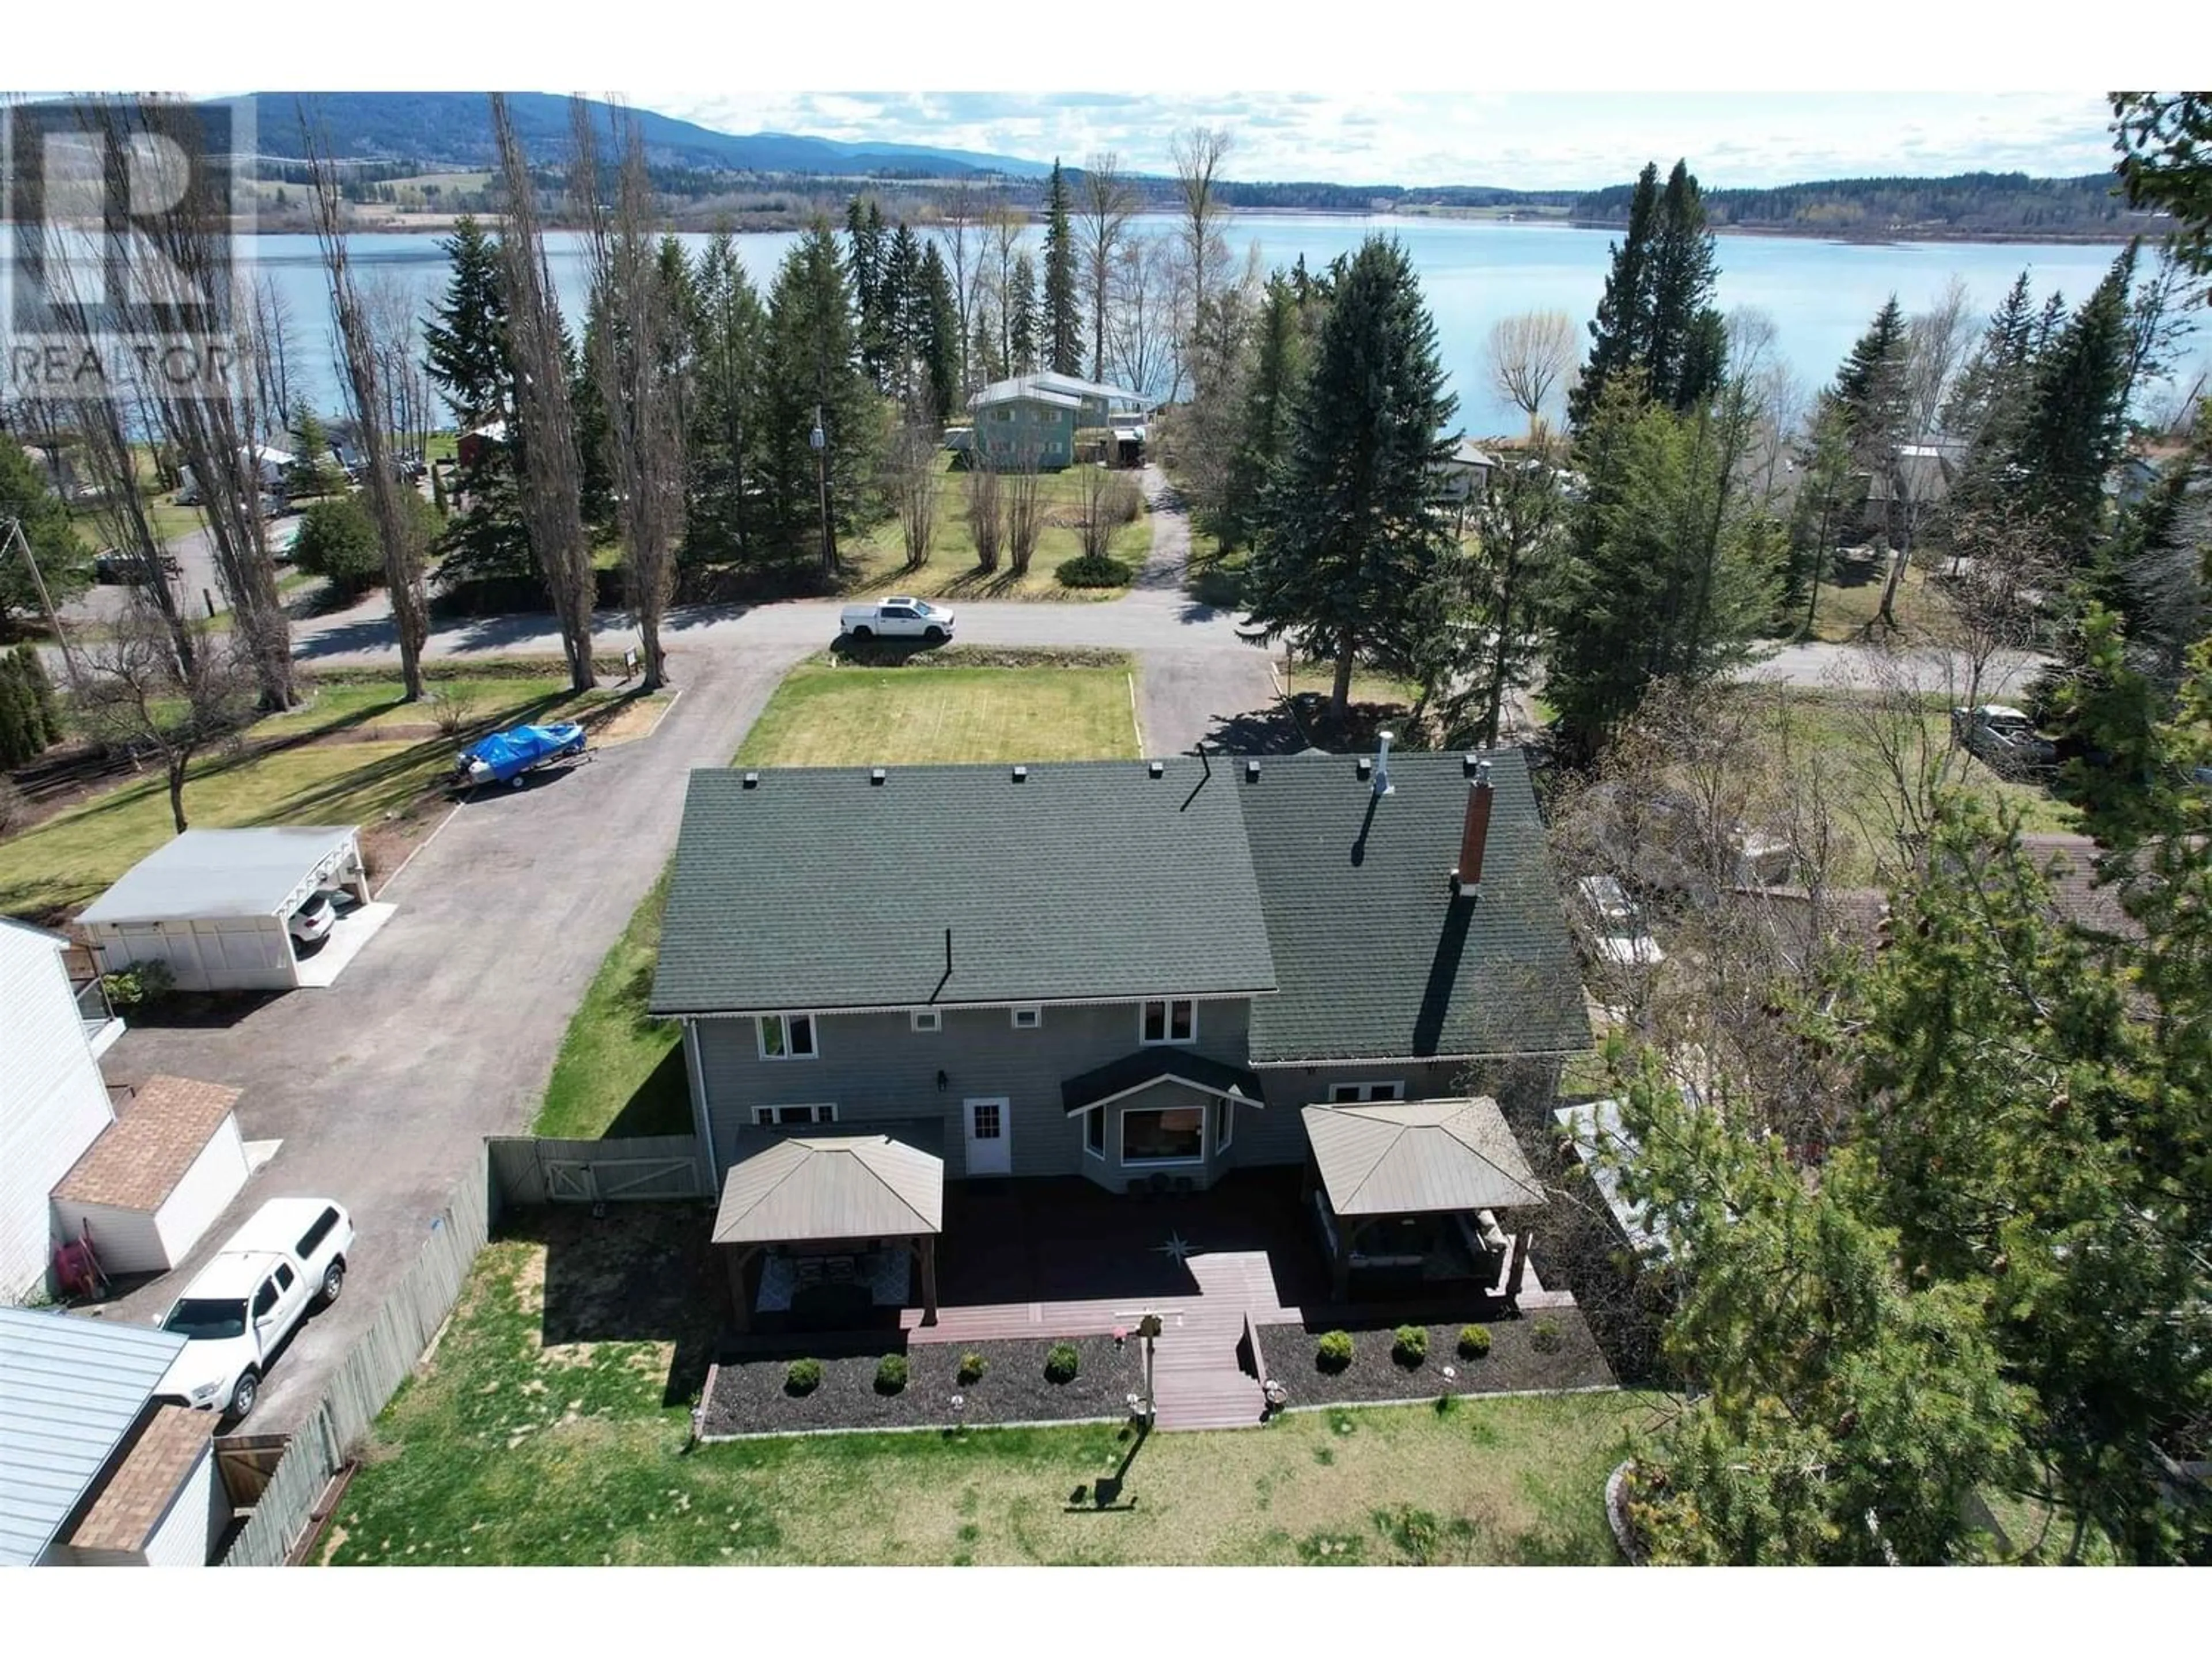 Lakeview for 1734 BEACH CRESCENT, Quesnel British Columbia V2J4J6